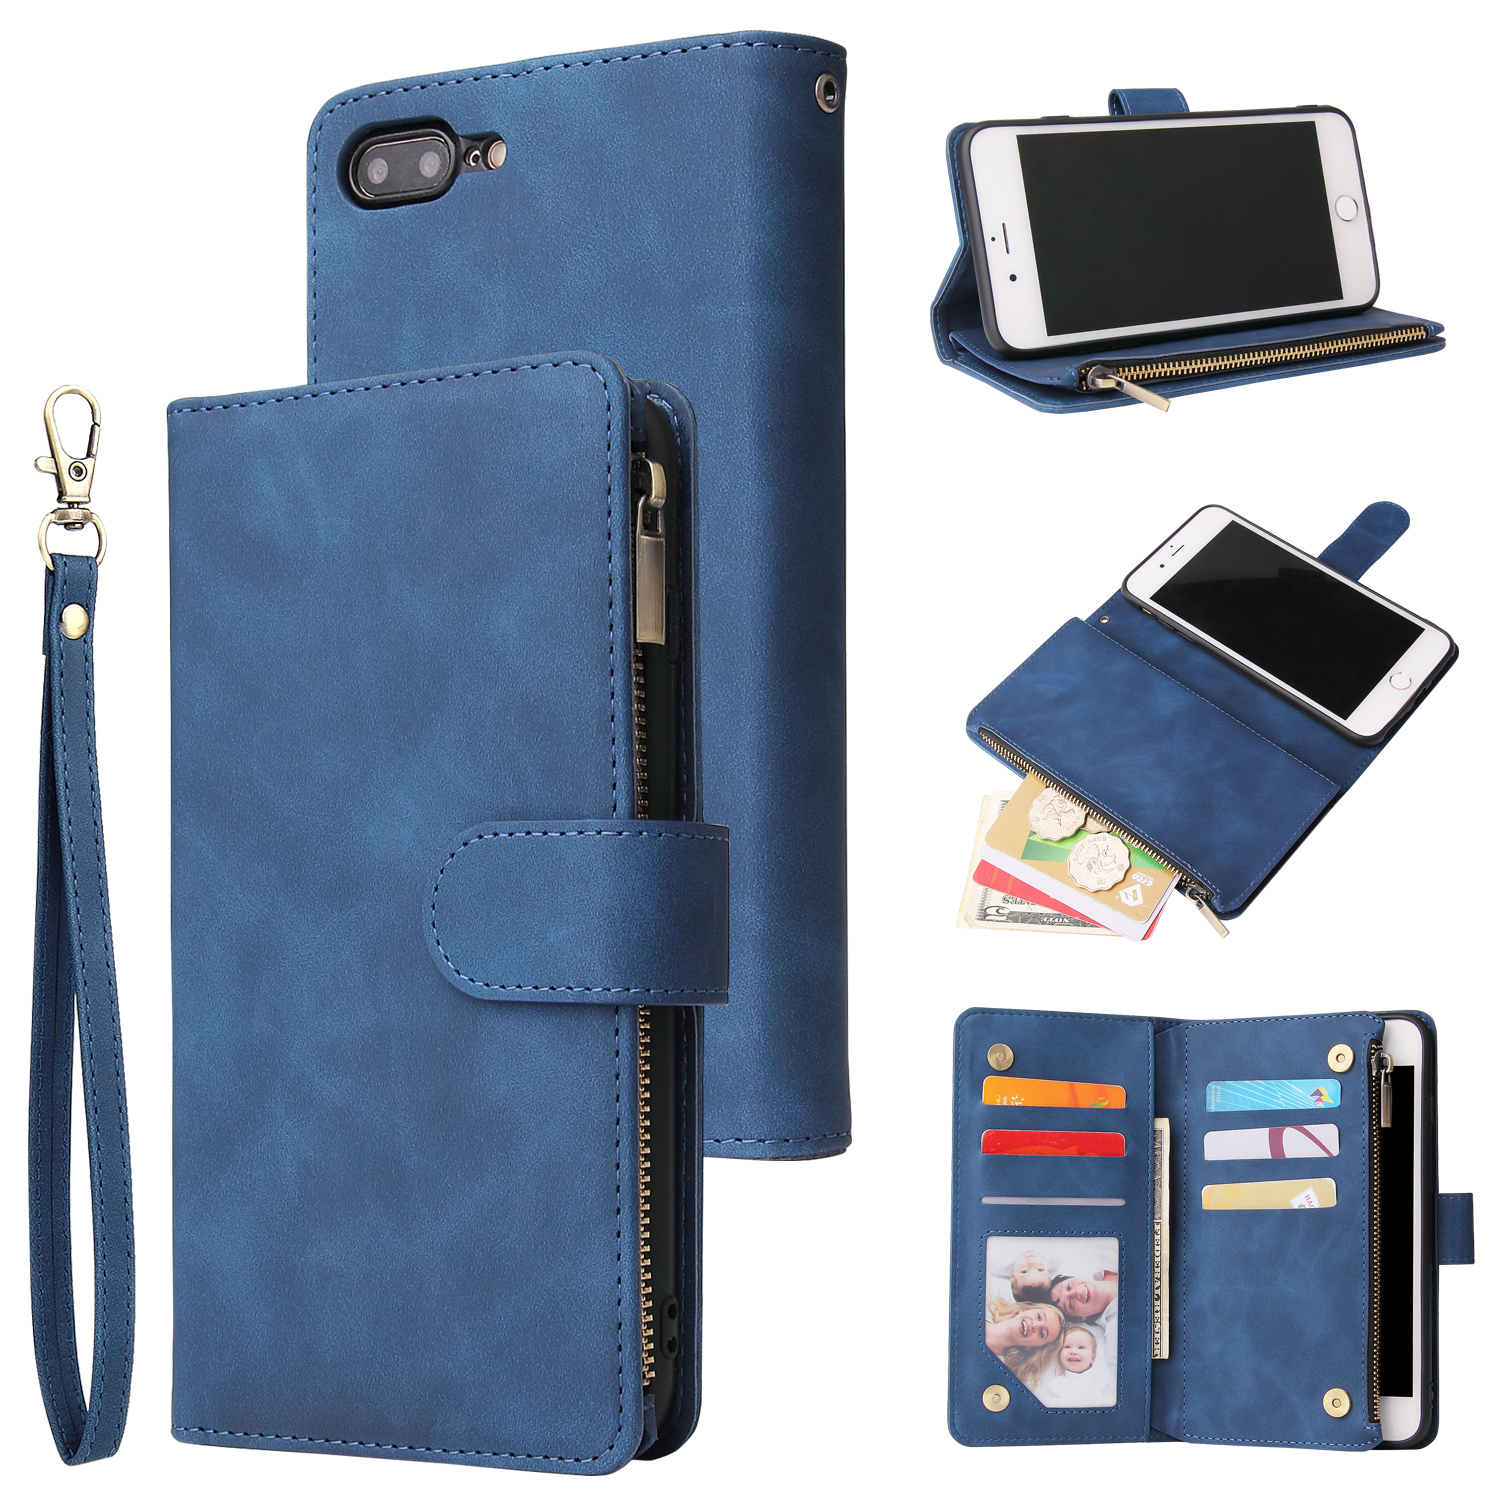 For iPhone 6 / 6S iPhone 6 plus / 6S plus iPhone 7 / 8 iPhone 7 plus / 8 plus Smart Phone Cover Coin Pocket with Cards Bracket Zipper Phone PU Leather Case Phone Cover  iPhone 7 plus / 8 plus